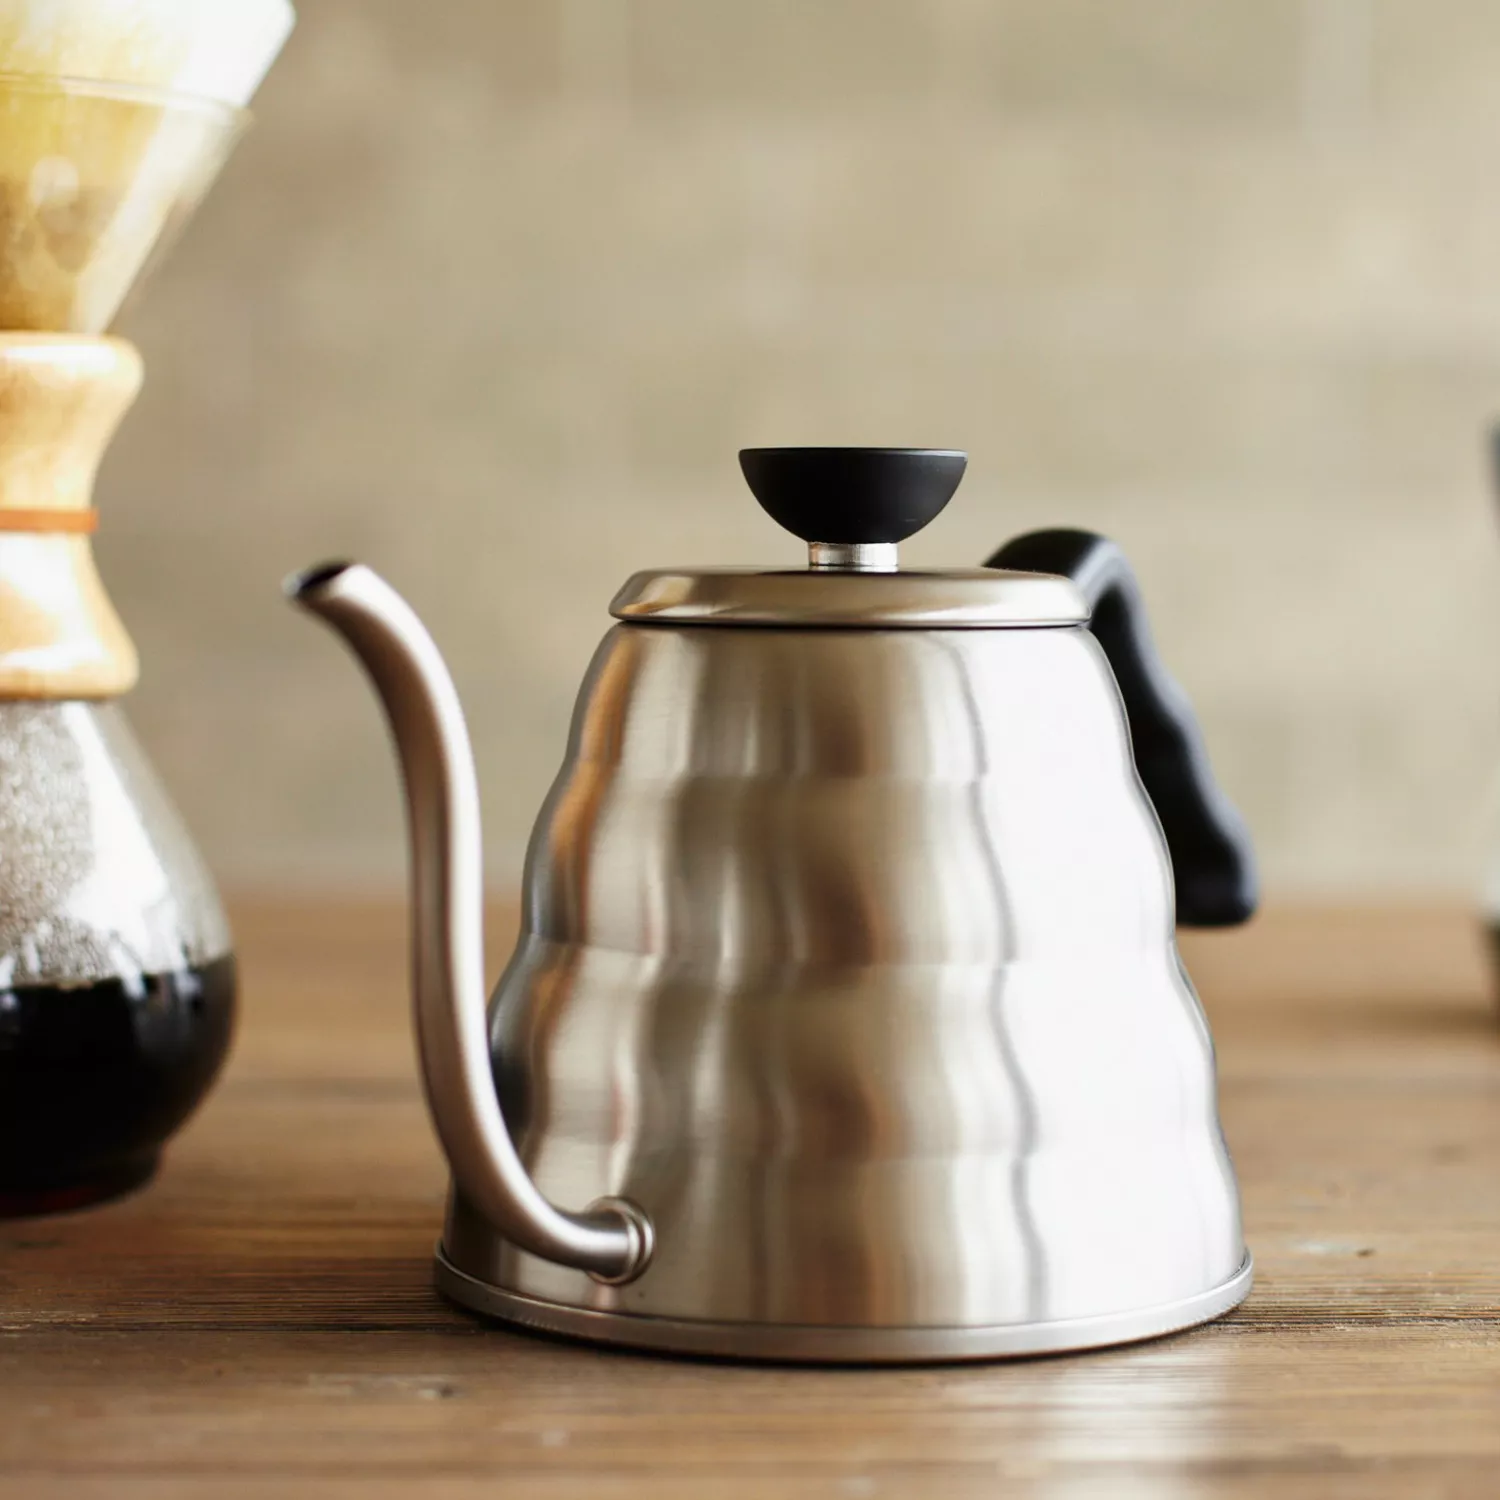 Hario V60 Buono Pouring Kettle Overview 